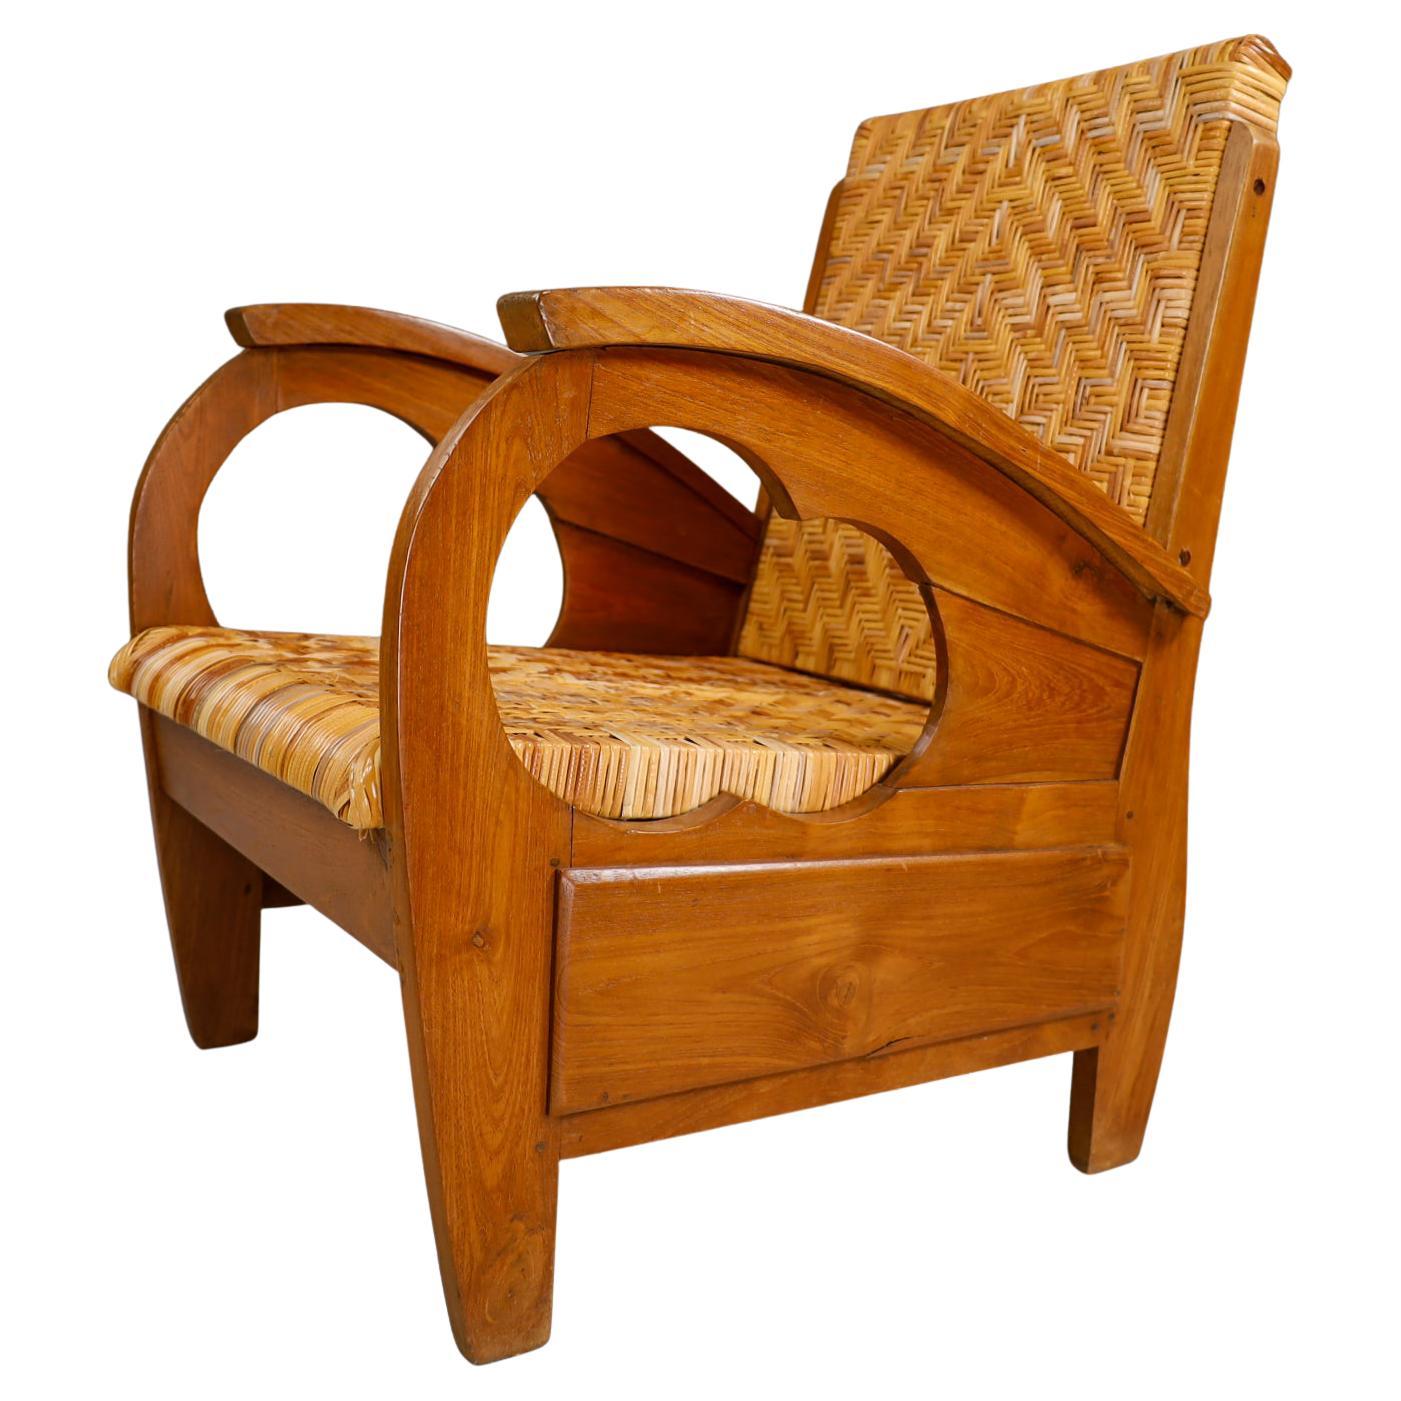 British Colonial Rattan and Wood Art Deco Arm Chair, India, 1920s